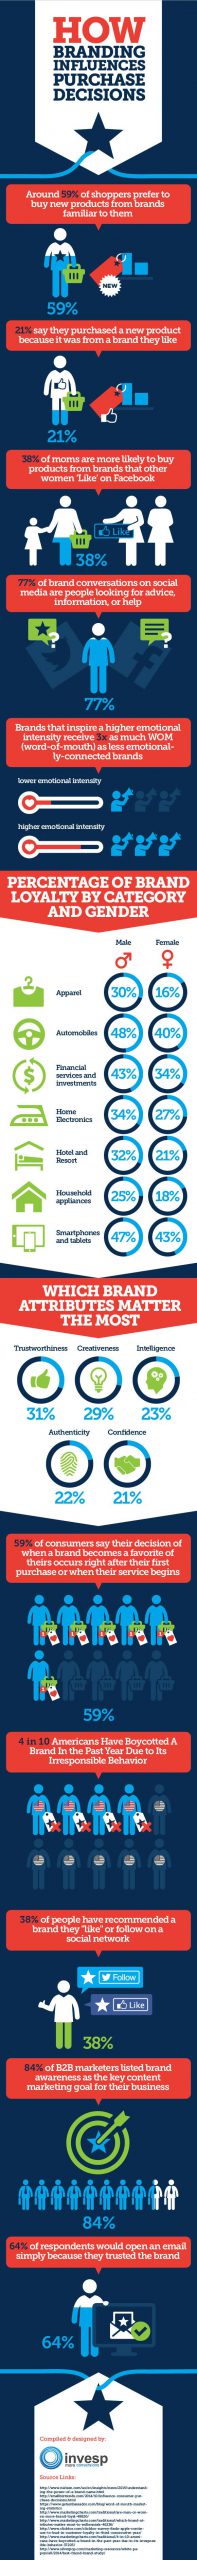 32 ecommerce stats to show how branding influences purchase decisions infographic scaled 1